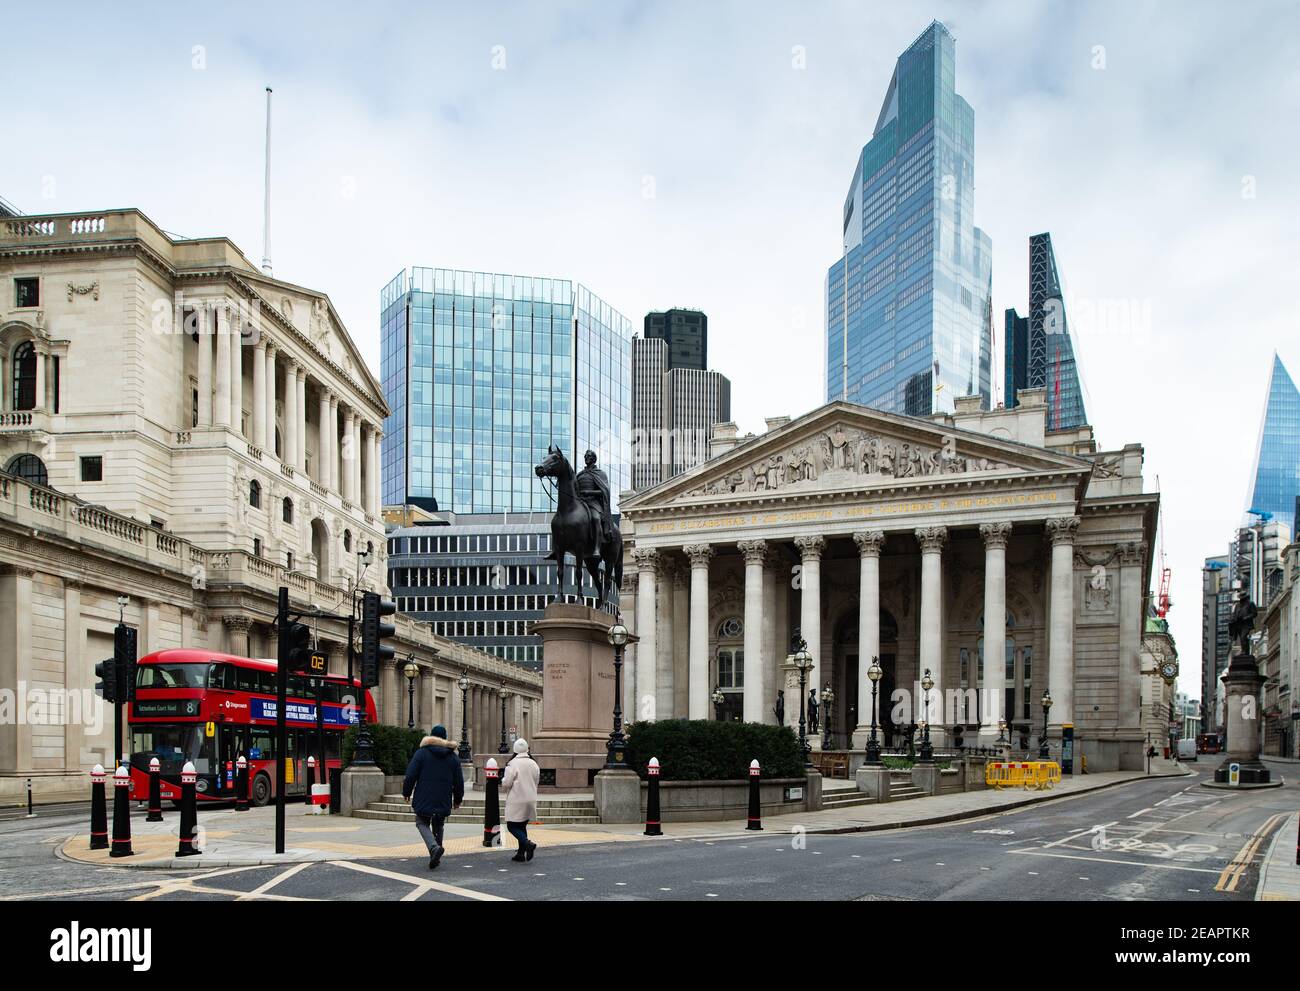 The Royal Exchange in Bank, London Stock Photo